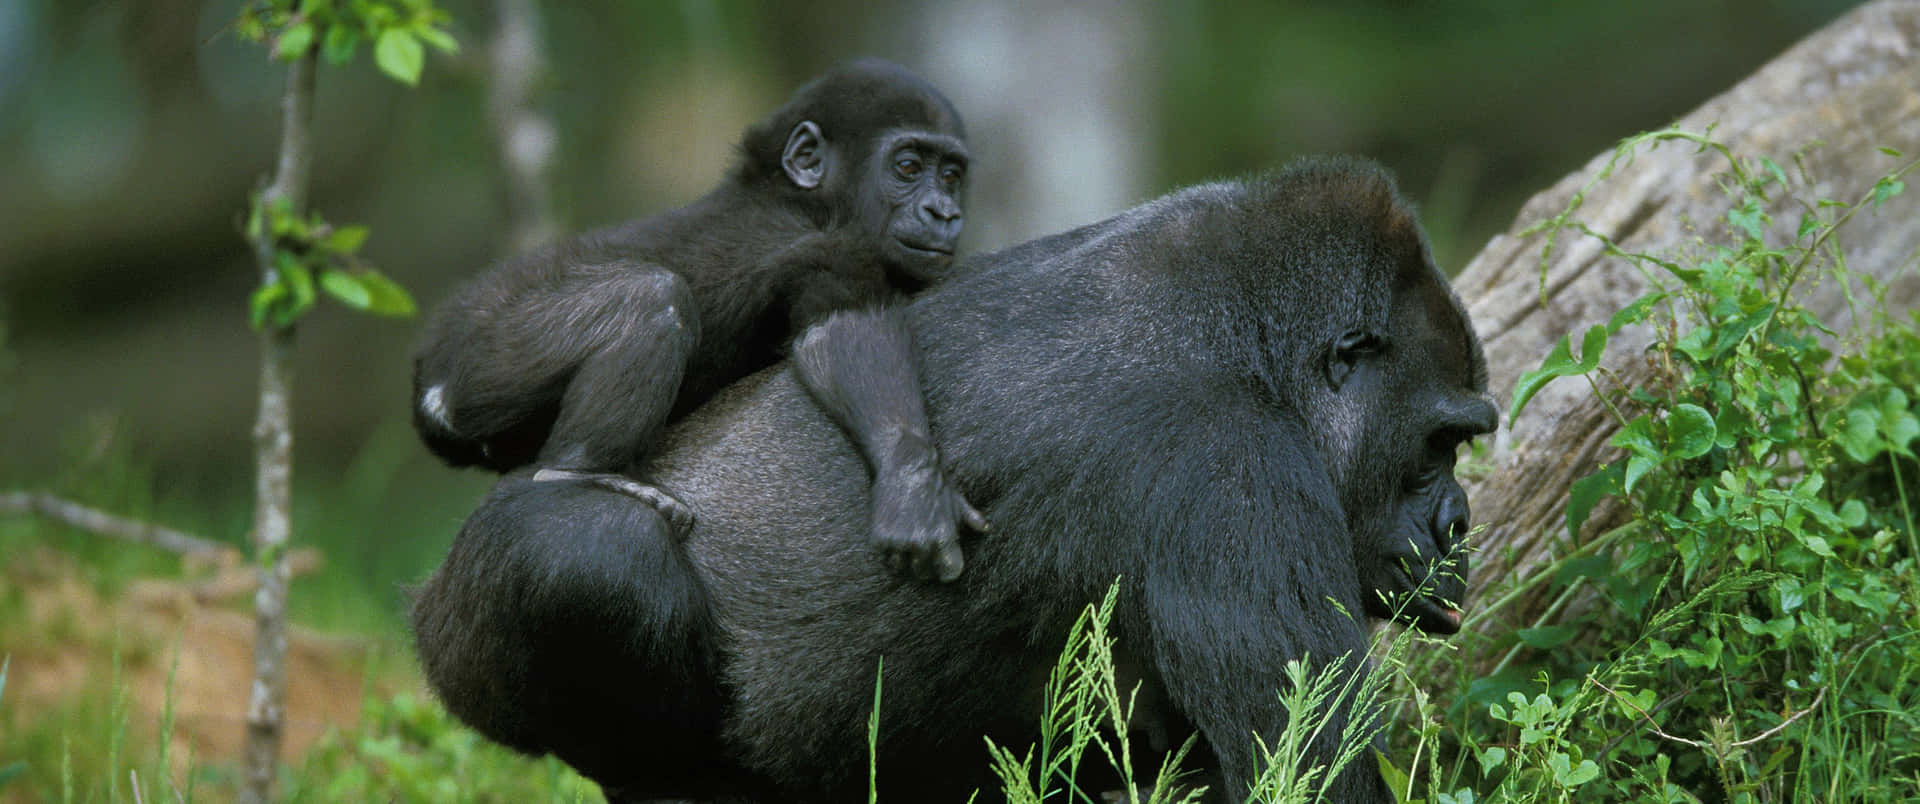 3440x1440p Gorilla Mother Carrying Its Baby Background